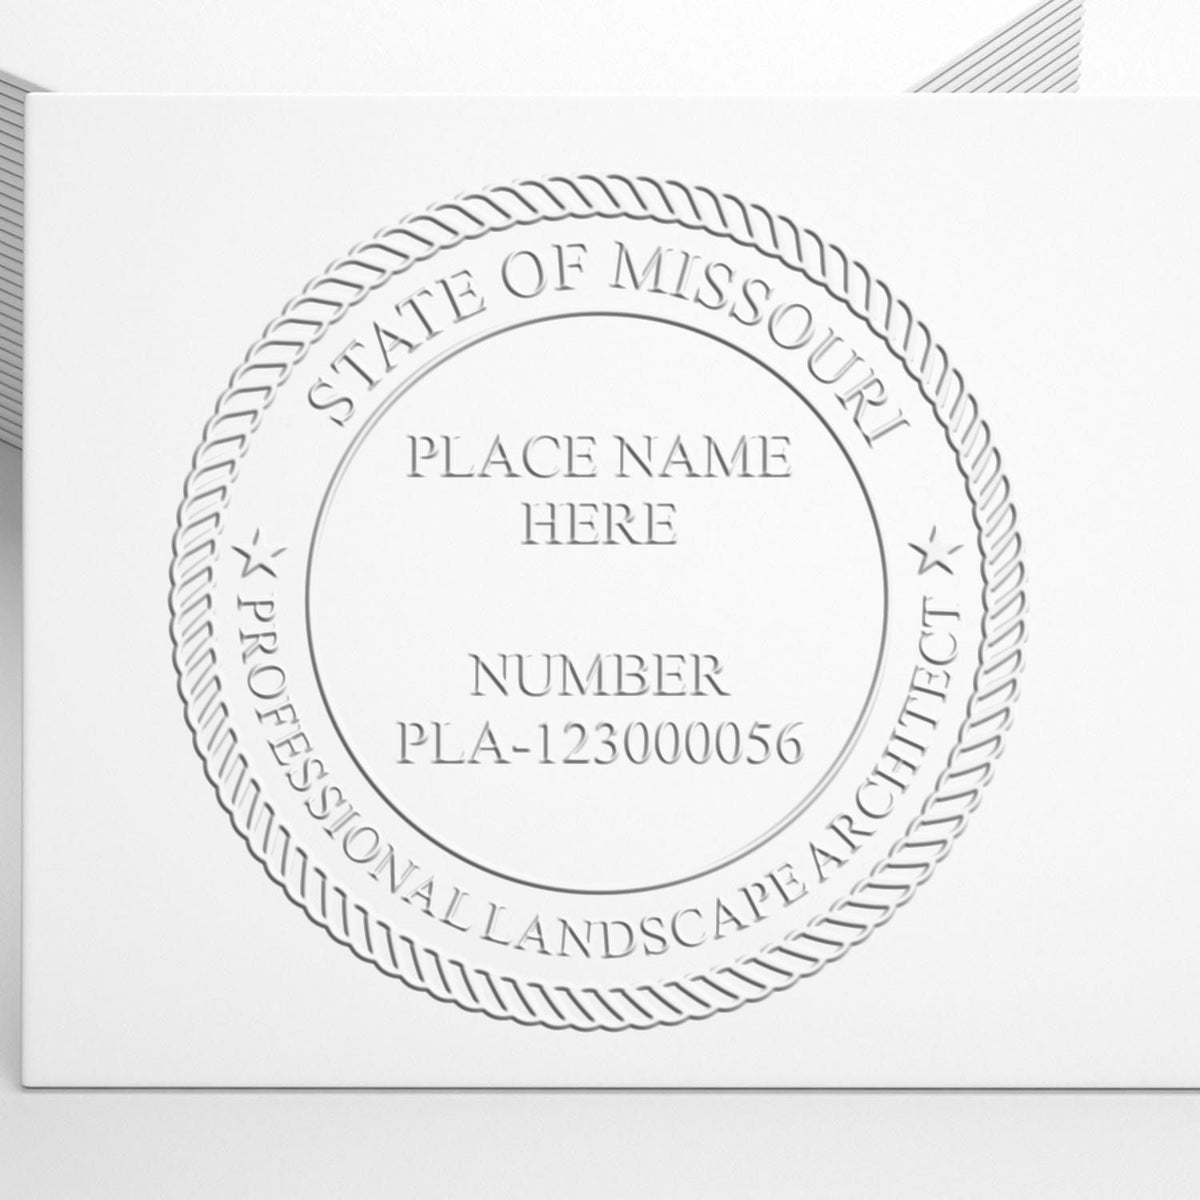 A photograph of the Hybrid Missouri Landscape Architect Seal stamp impression reveals a vivid, professional image of the on paper.